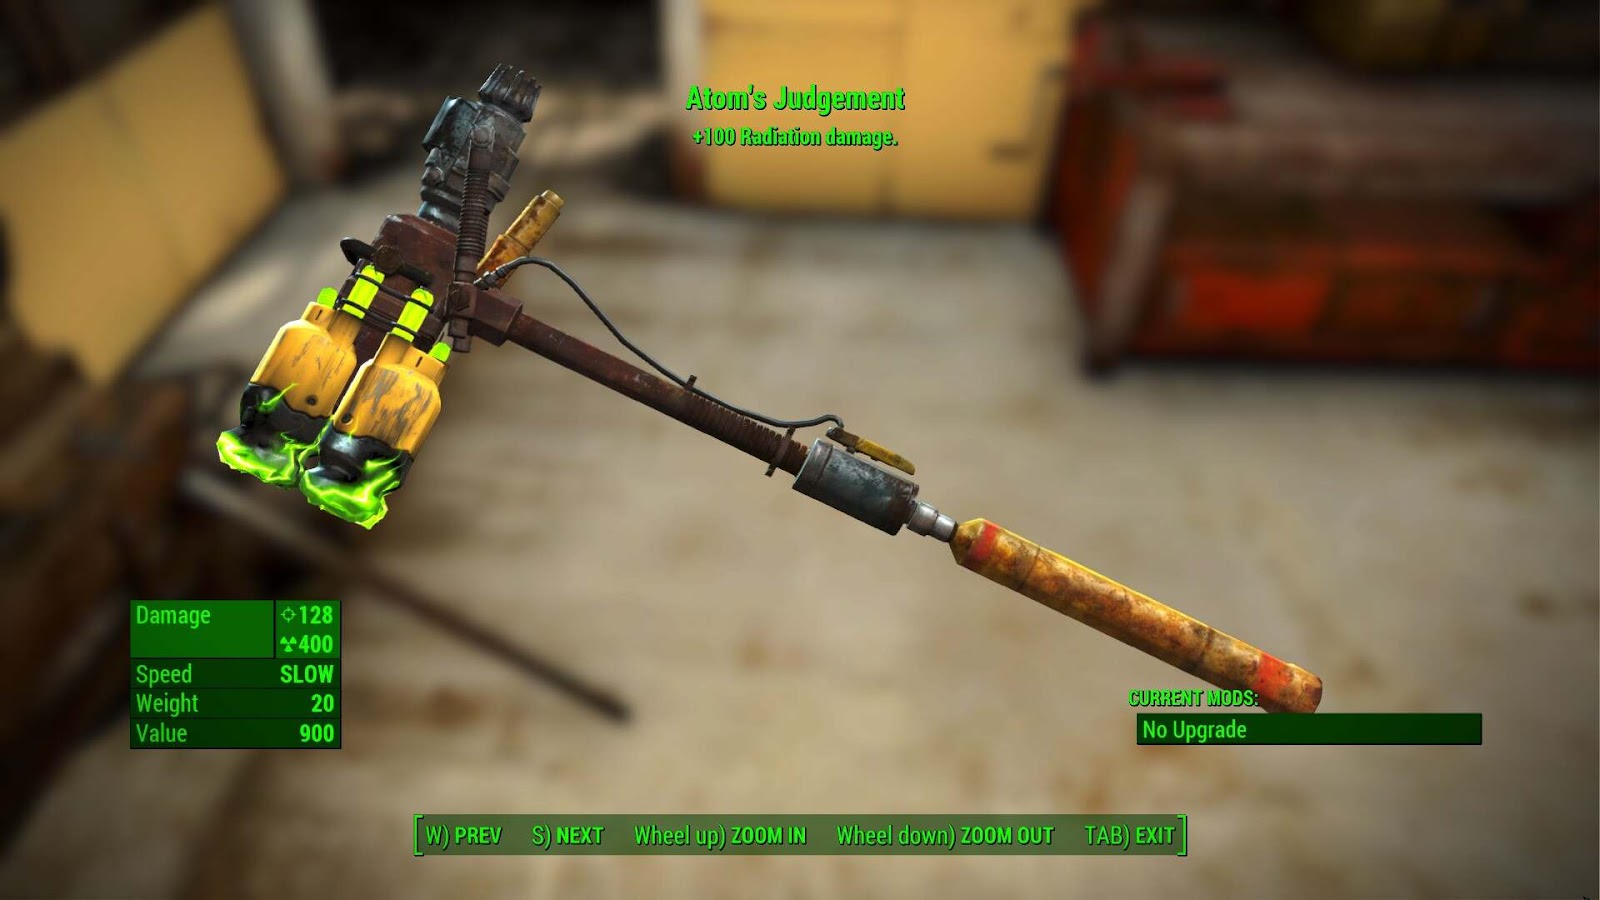 Atom's Judgement, a motorized sledgehammer with leaking Fusion Cores attached to its head, viewed through the inventory UI of Fallout 4.